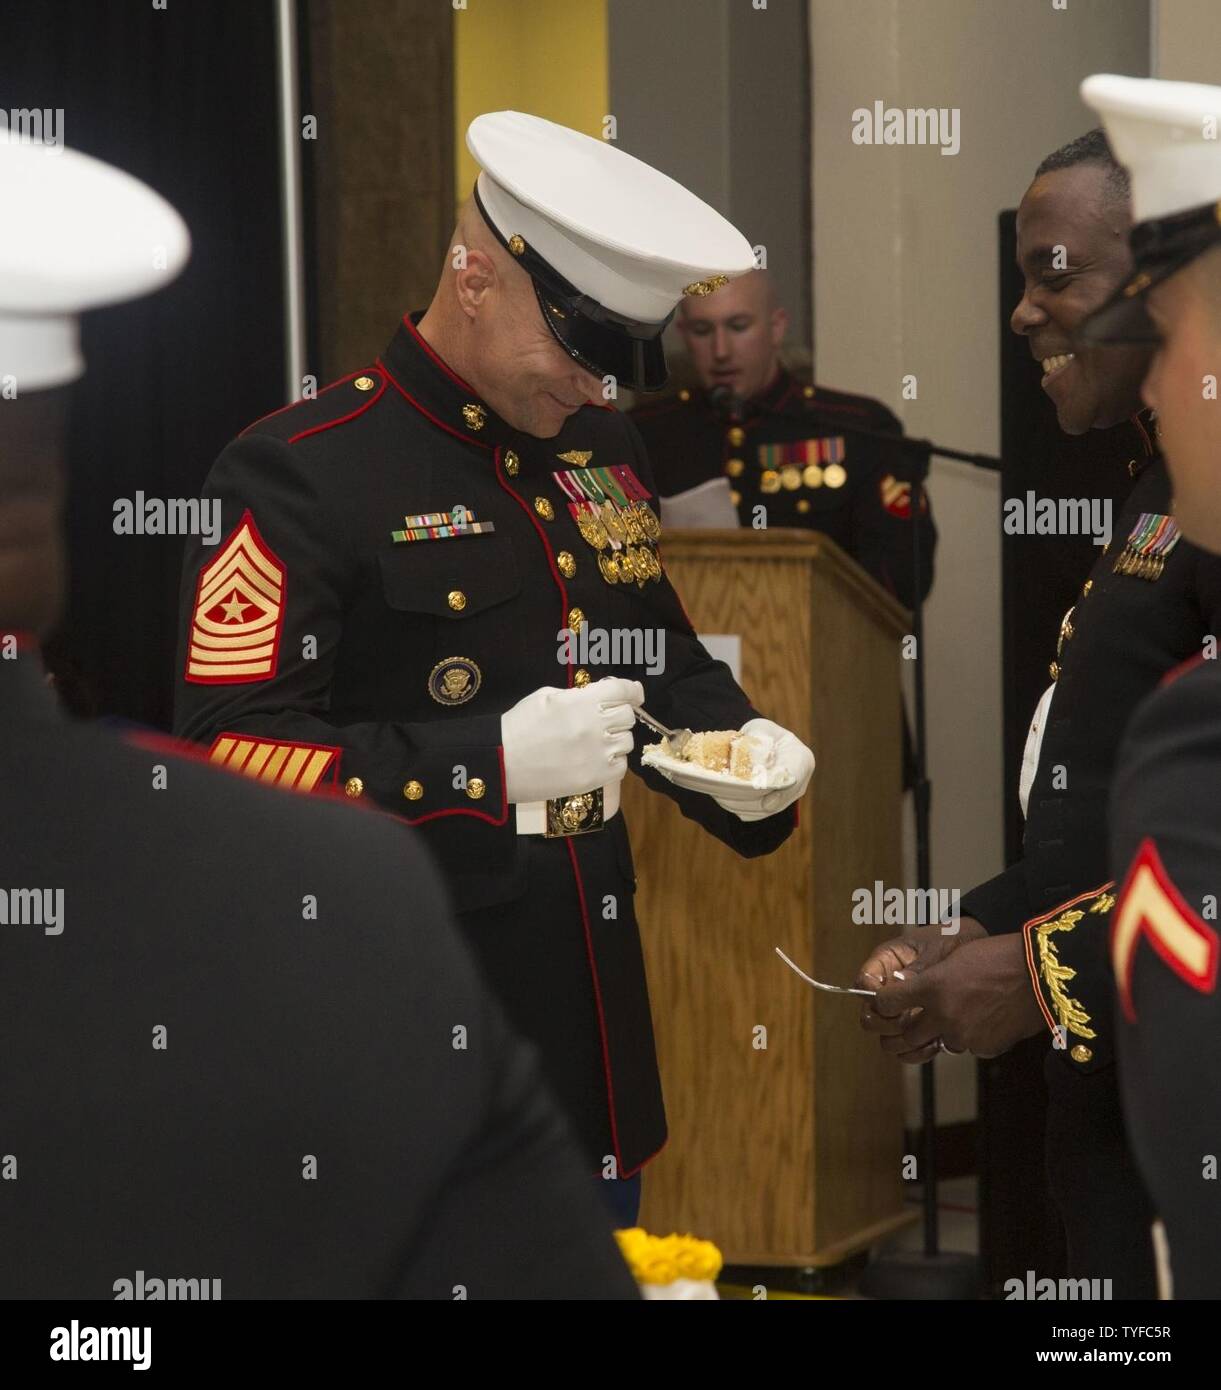 U.S. Marine Corps Sgt. Maj. Charles Metzger, left, sergeant major, Marine Corps Air Station New River (MCAS) receives birthday cake from Lt. Col. Quentin Vaughn, commanding officer, Headquarters and Headquarters Squadron (H&HS), during the H&HS MCAS New River 241st Marine Corps Birthday Ball at the Crystal Coast Civic Center, Morehead City, N.C., Nov. 5, 2016. The Marine Corps has carried 241 years of traditions, values and standards since its establishment in 1775. Stock Photo